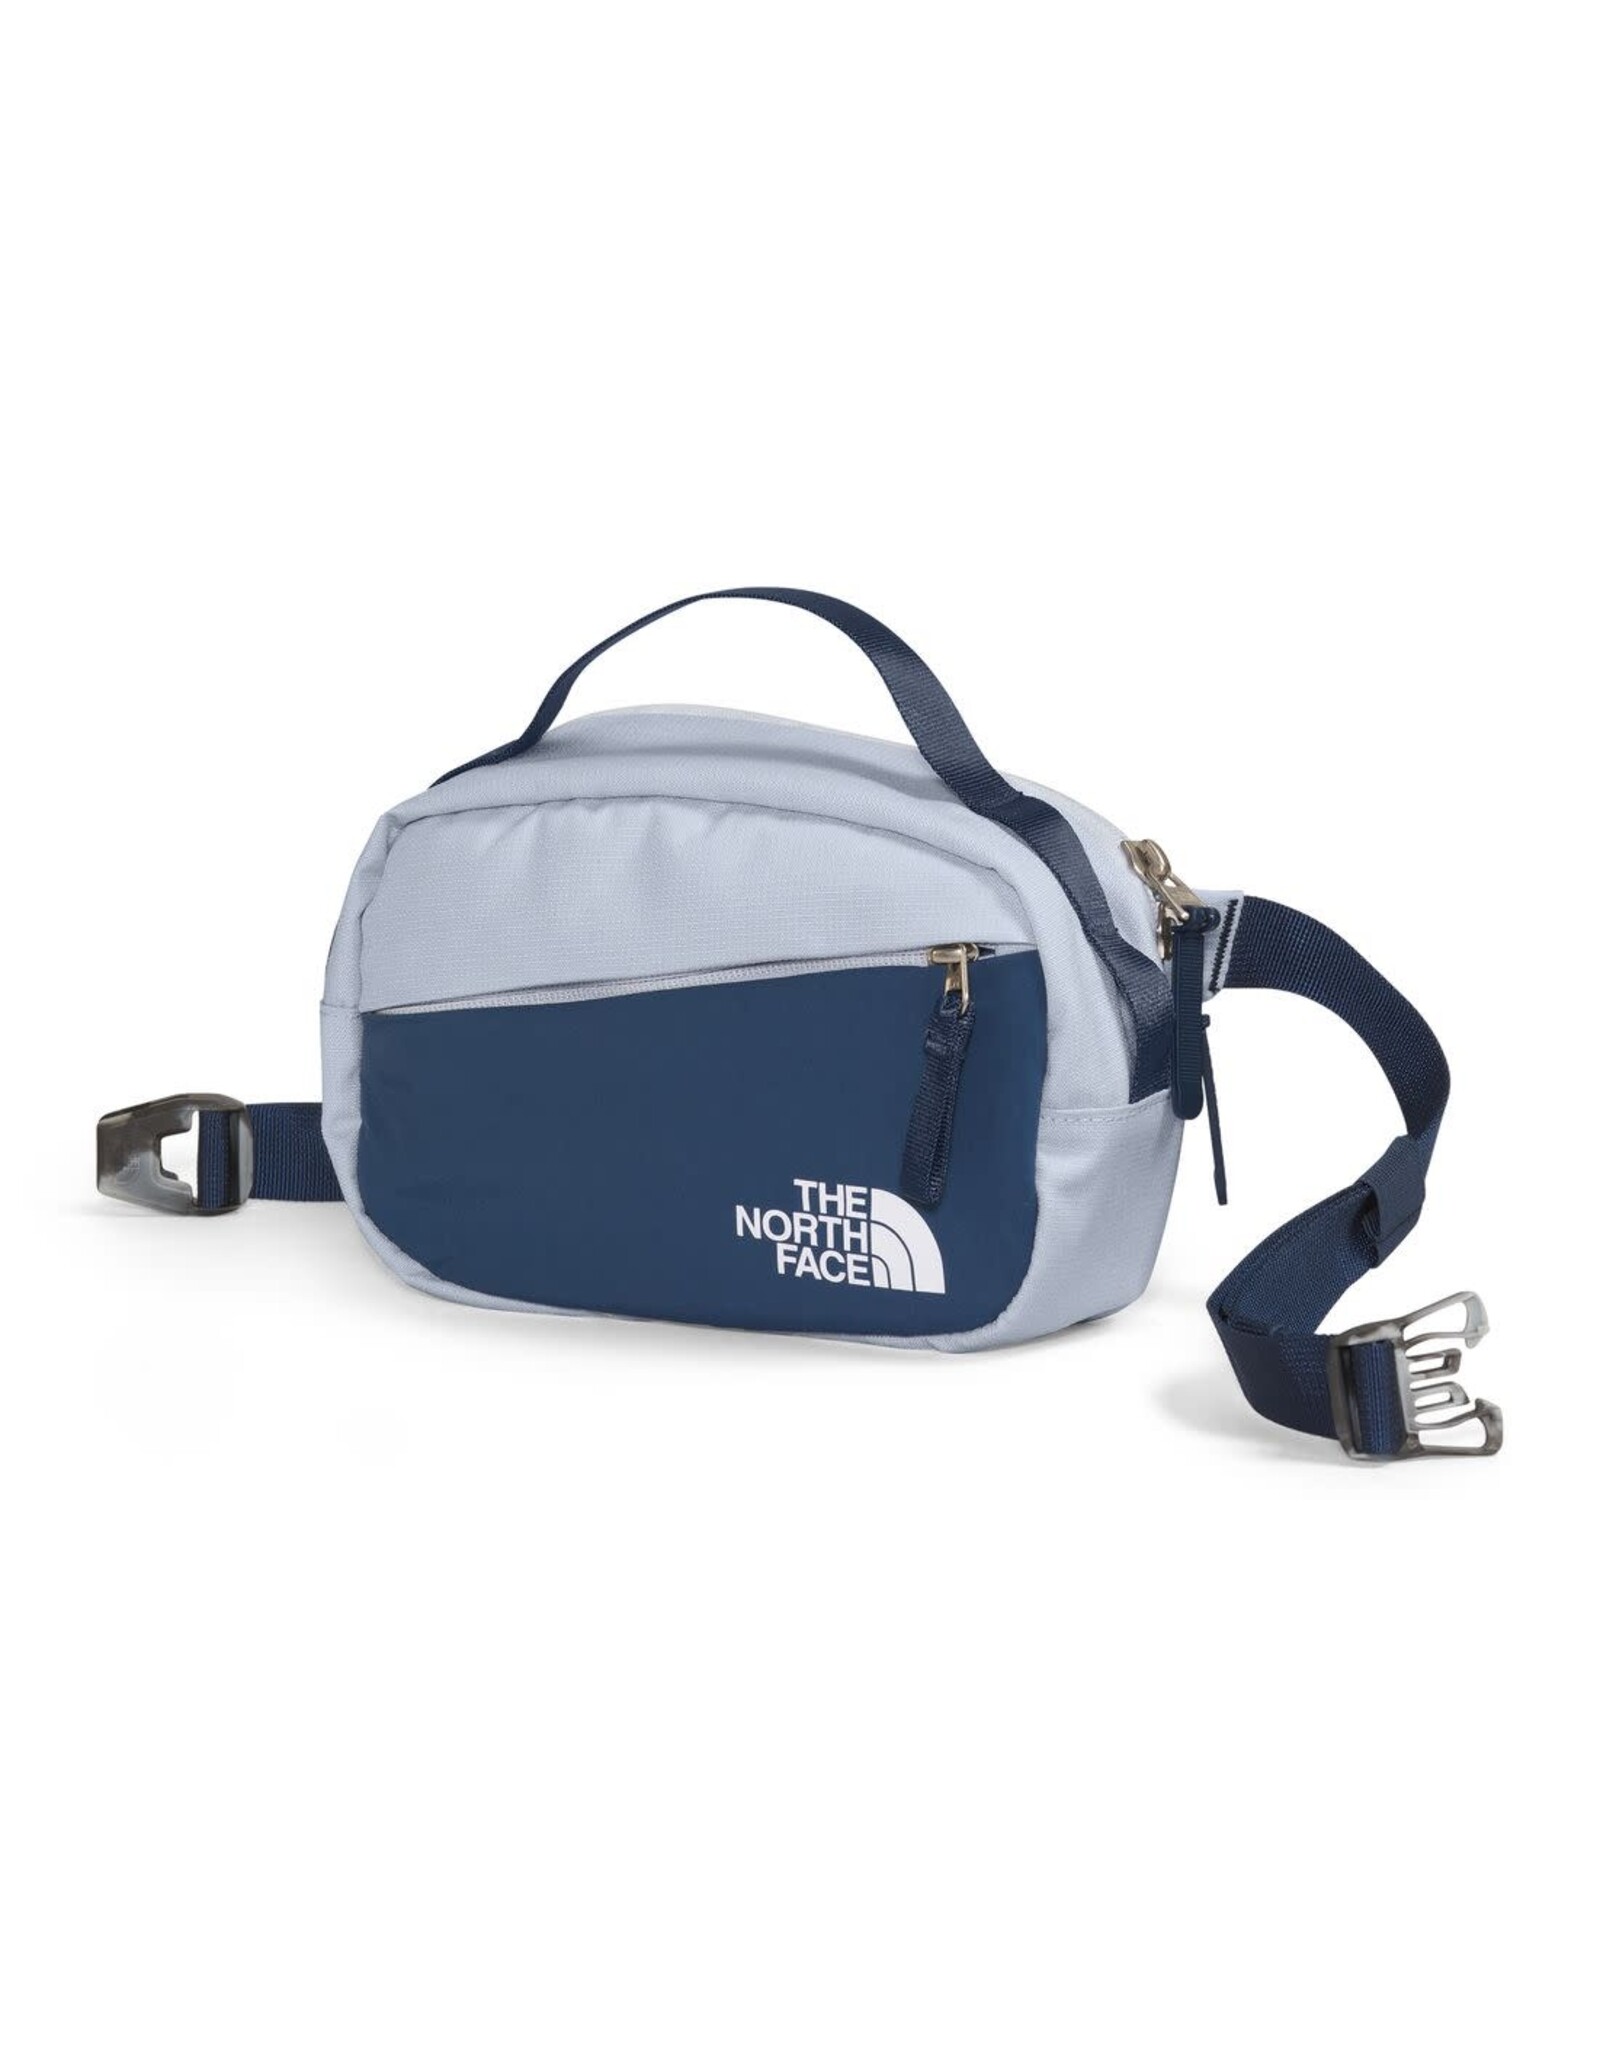 THE NORTH FACE W ISABELLA HIP PACK